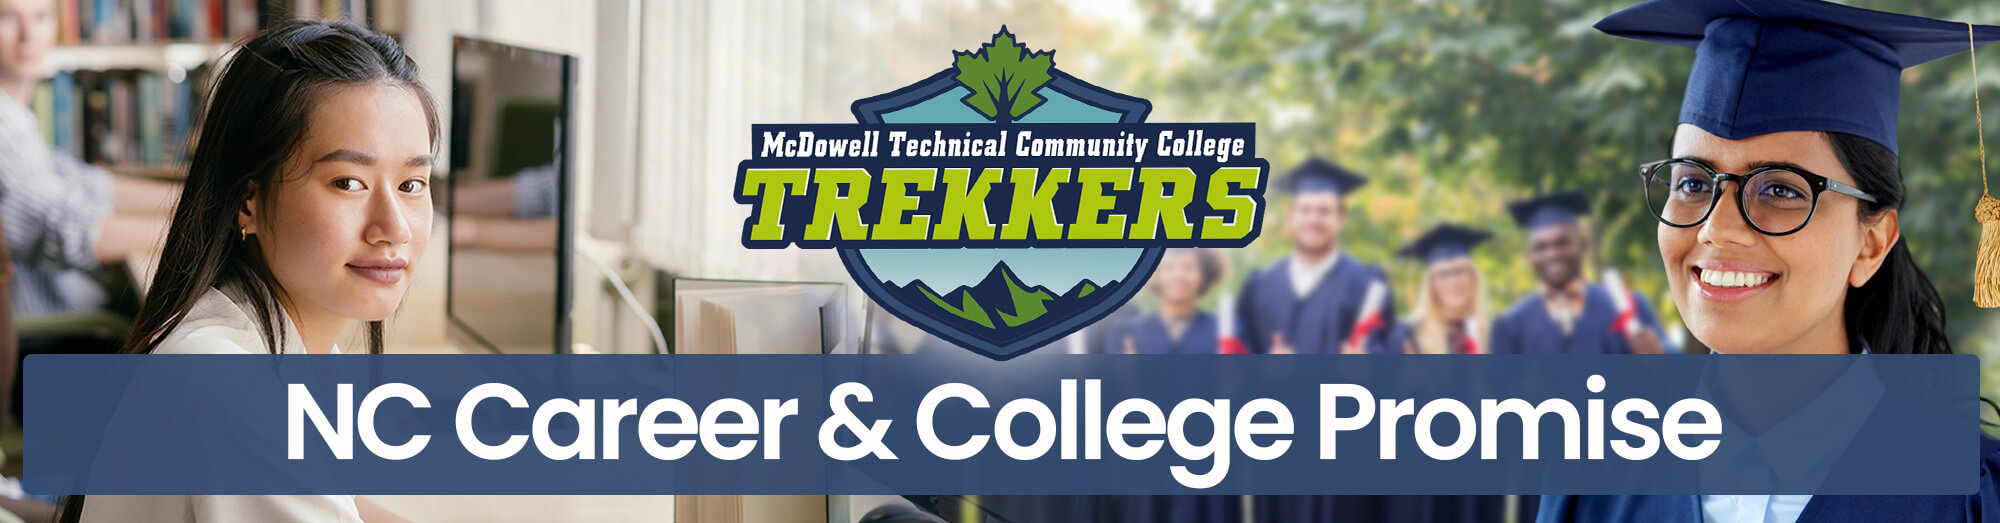 Header showing a student at work and then graduation with the mtcc trekker logo. Text says NC Career and College Promise